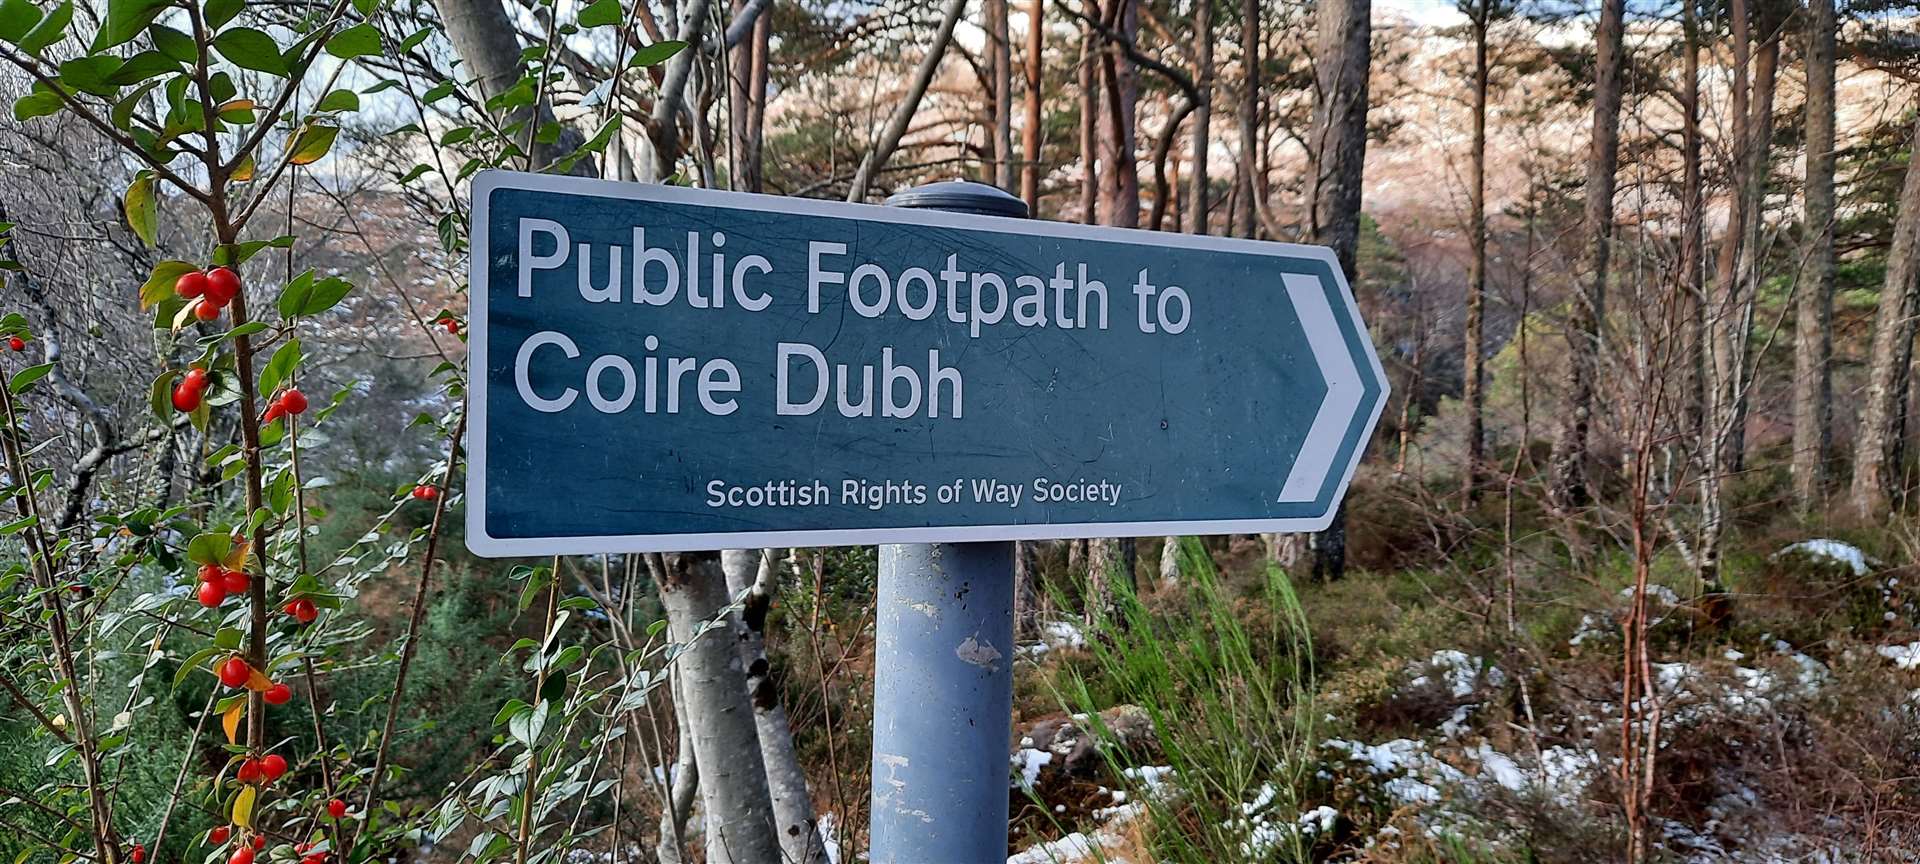 A rights of way sign points the route to Coire Dubh.